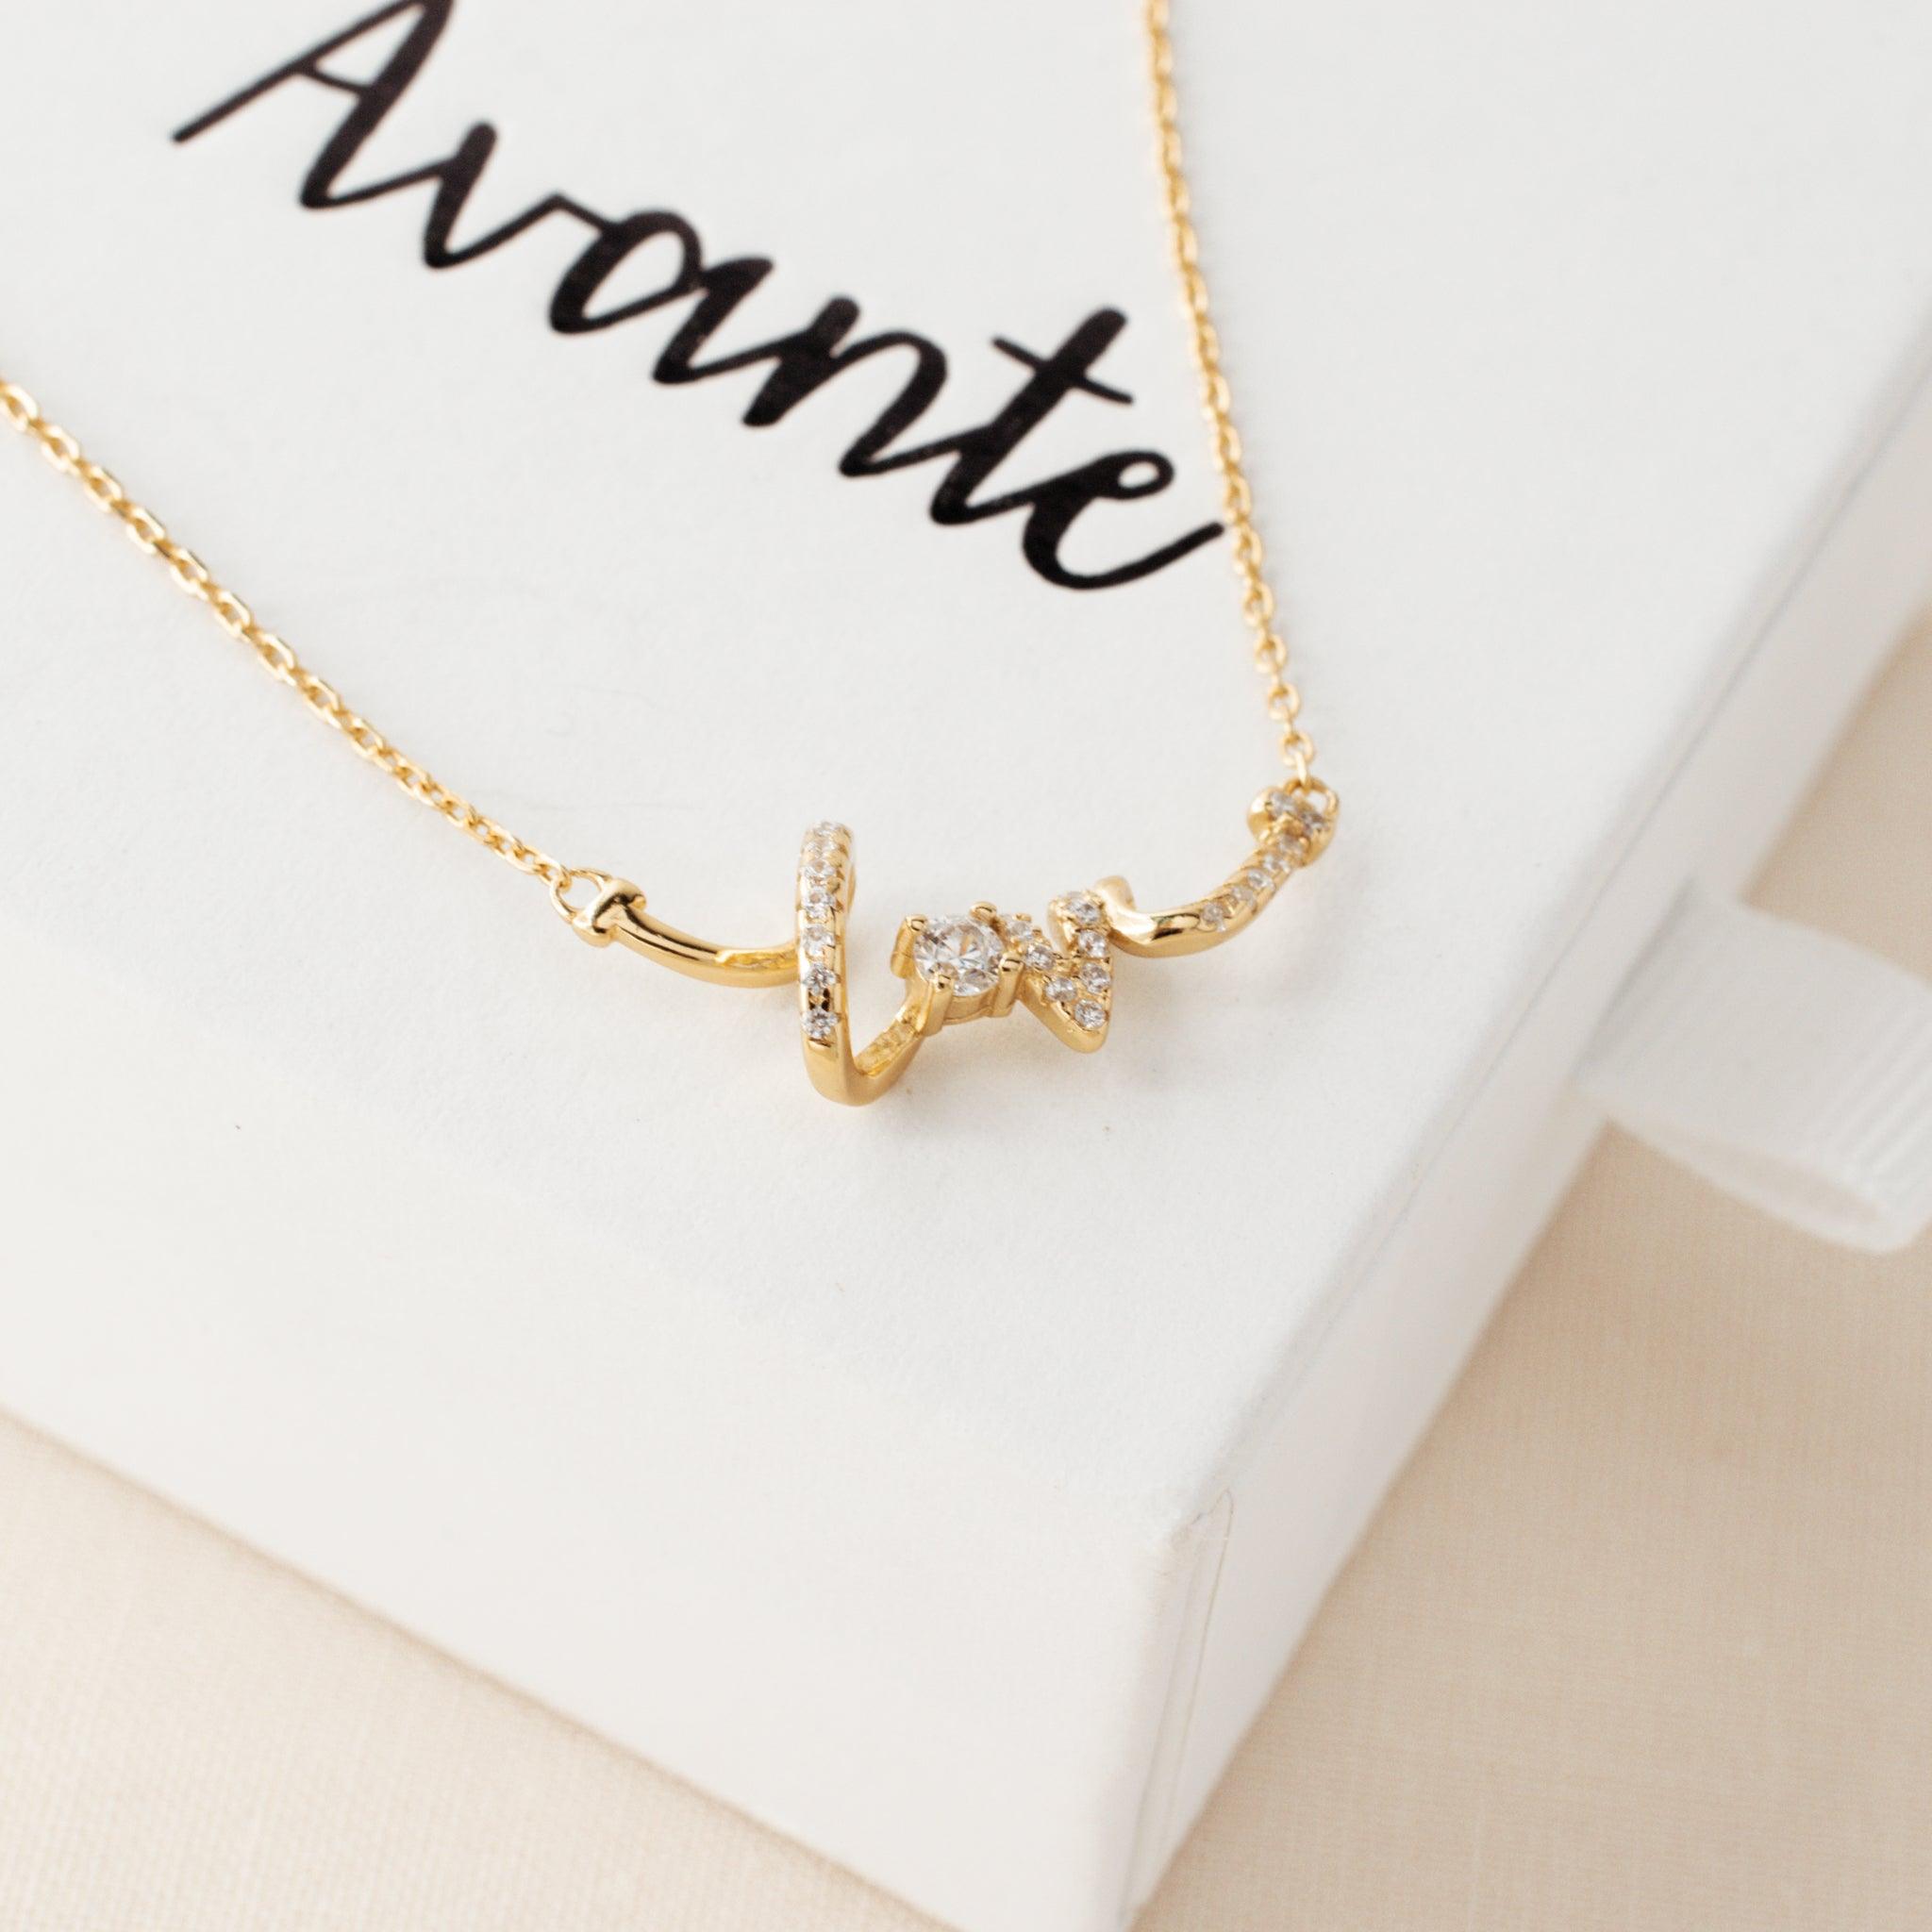 love pendant necklace laying on a jewelry gift box from Avante Jewelry